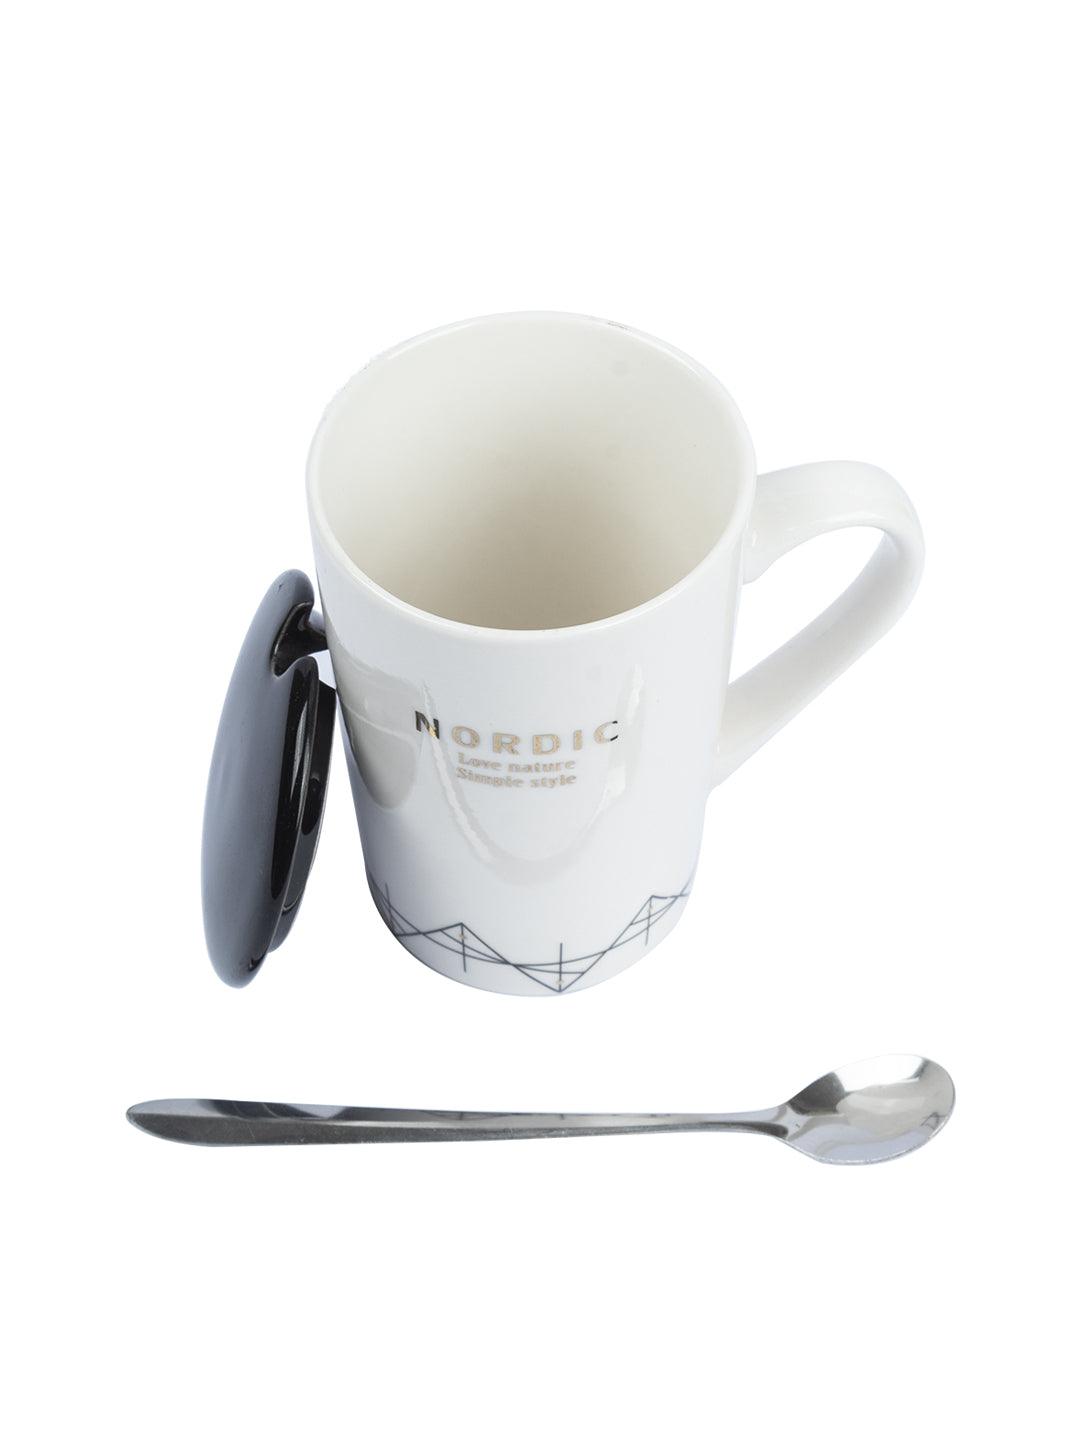 "NORDIC" Coffee Mug With Ceramic Lid and Spoon - White, 450mL - MARKET 99